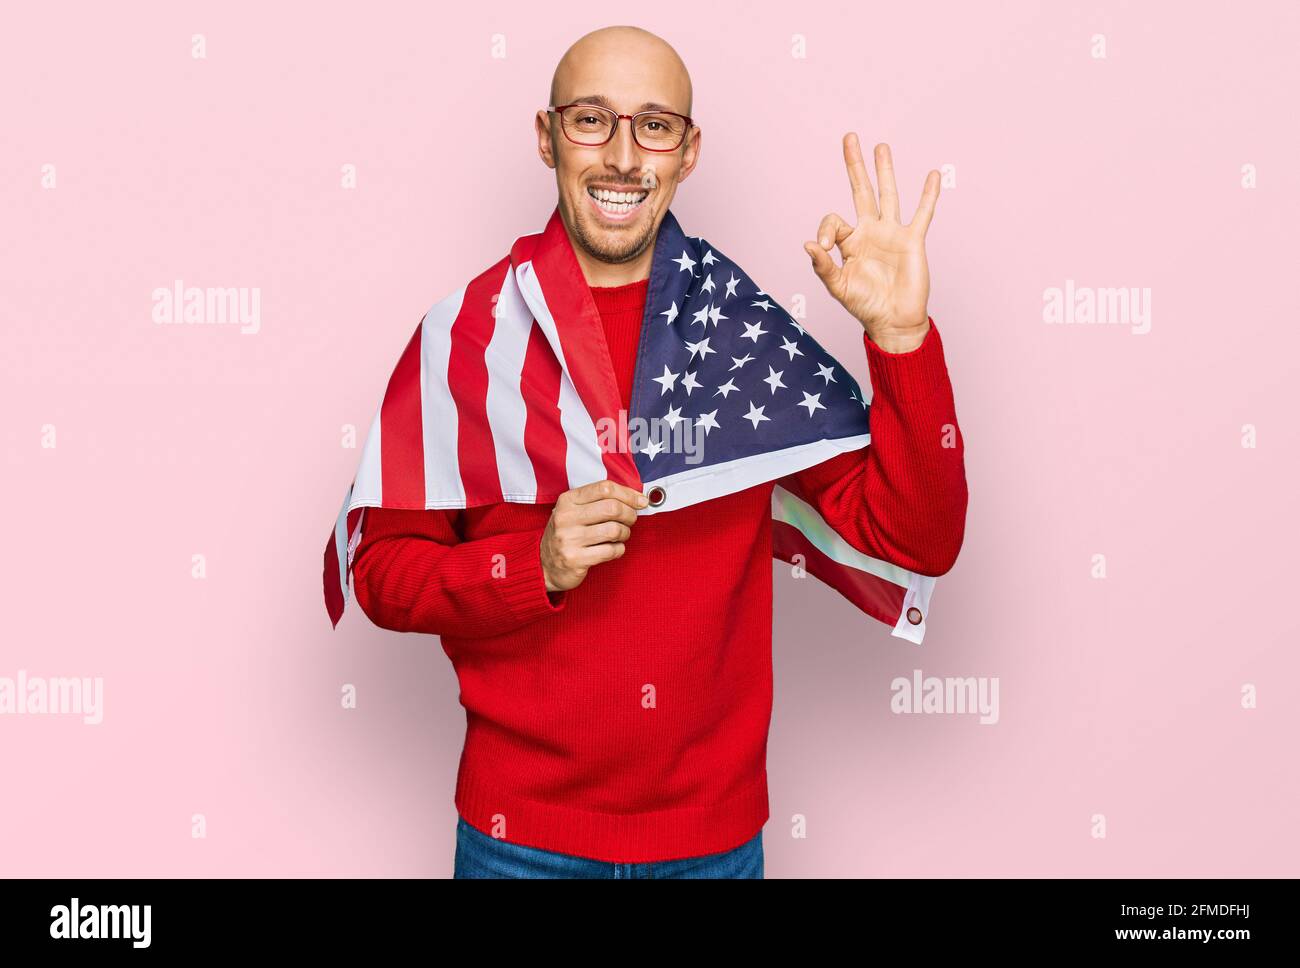 Bald man with beard wrapped around united states flag doing ok sign with fingers, smiling friendly gesturing excellent symbol Stock Photo